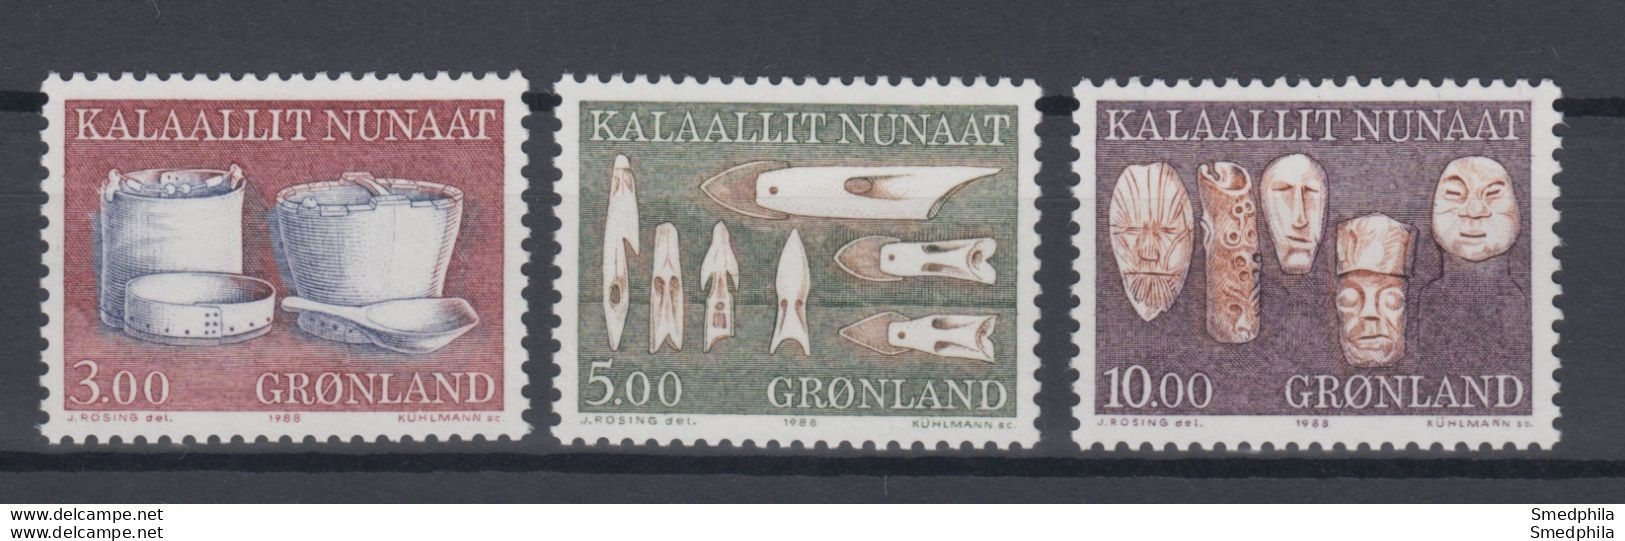 Greenland 1988 - Michel 186-188 MNH ** - Unused Stamps